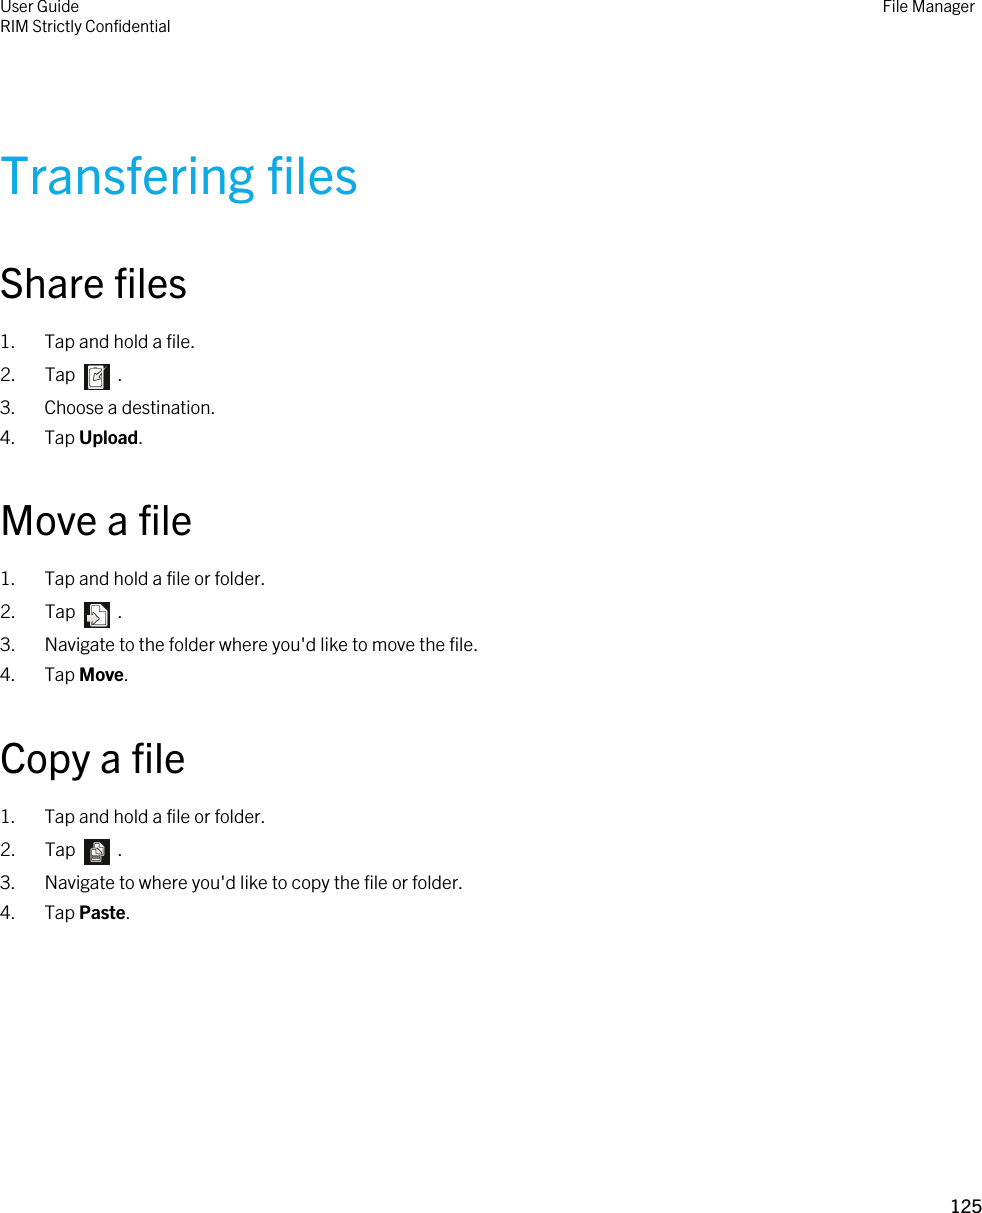 Transfering filesShare files1. Tap and hold a file.2.  Tap    .3. Choose a destination.4. Tap Upload.Move a file1. Tap and hold a file or folder.2.  Tap    .3. Navigate to the folder where you&apos;d like to move the file.4. Tap Move.Copy a file1. Tap and hold a file or folder.2.  Tap    .3. Navigate to where you&apos;d like to copy the file or folder.4. Tap Paste.User GuideRIM Strictly Confidential File Manager125 